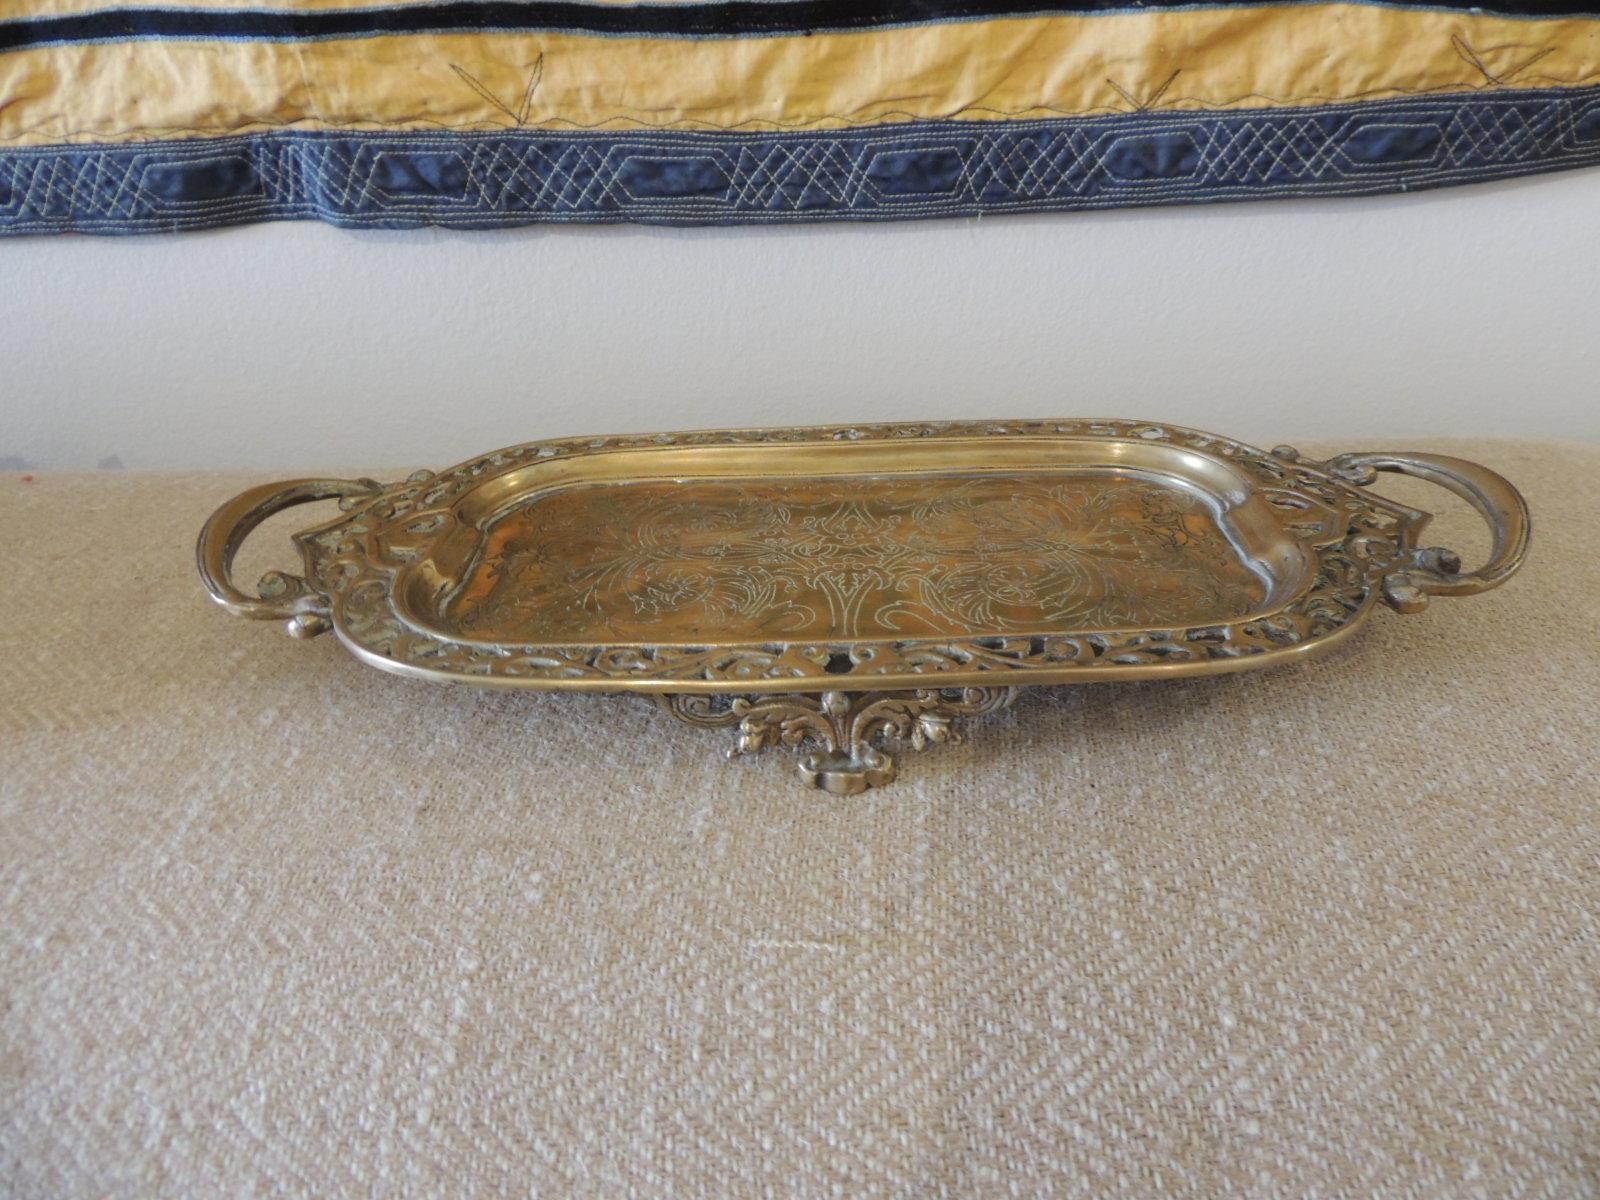 Vintage oval Indian brass decorative tray with handles.
Size: 9